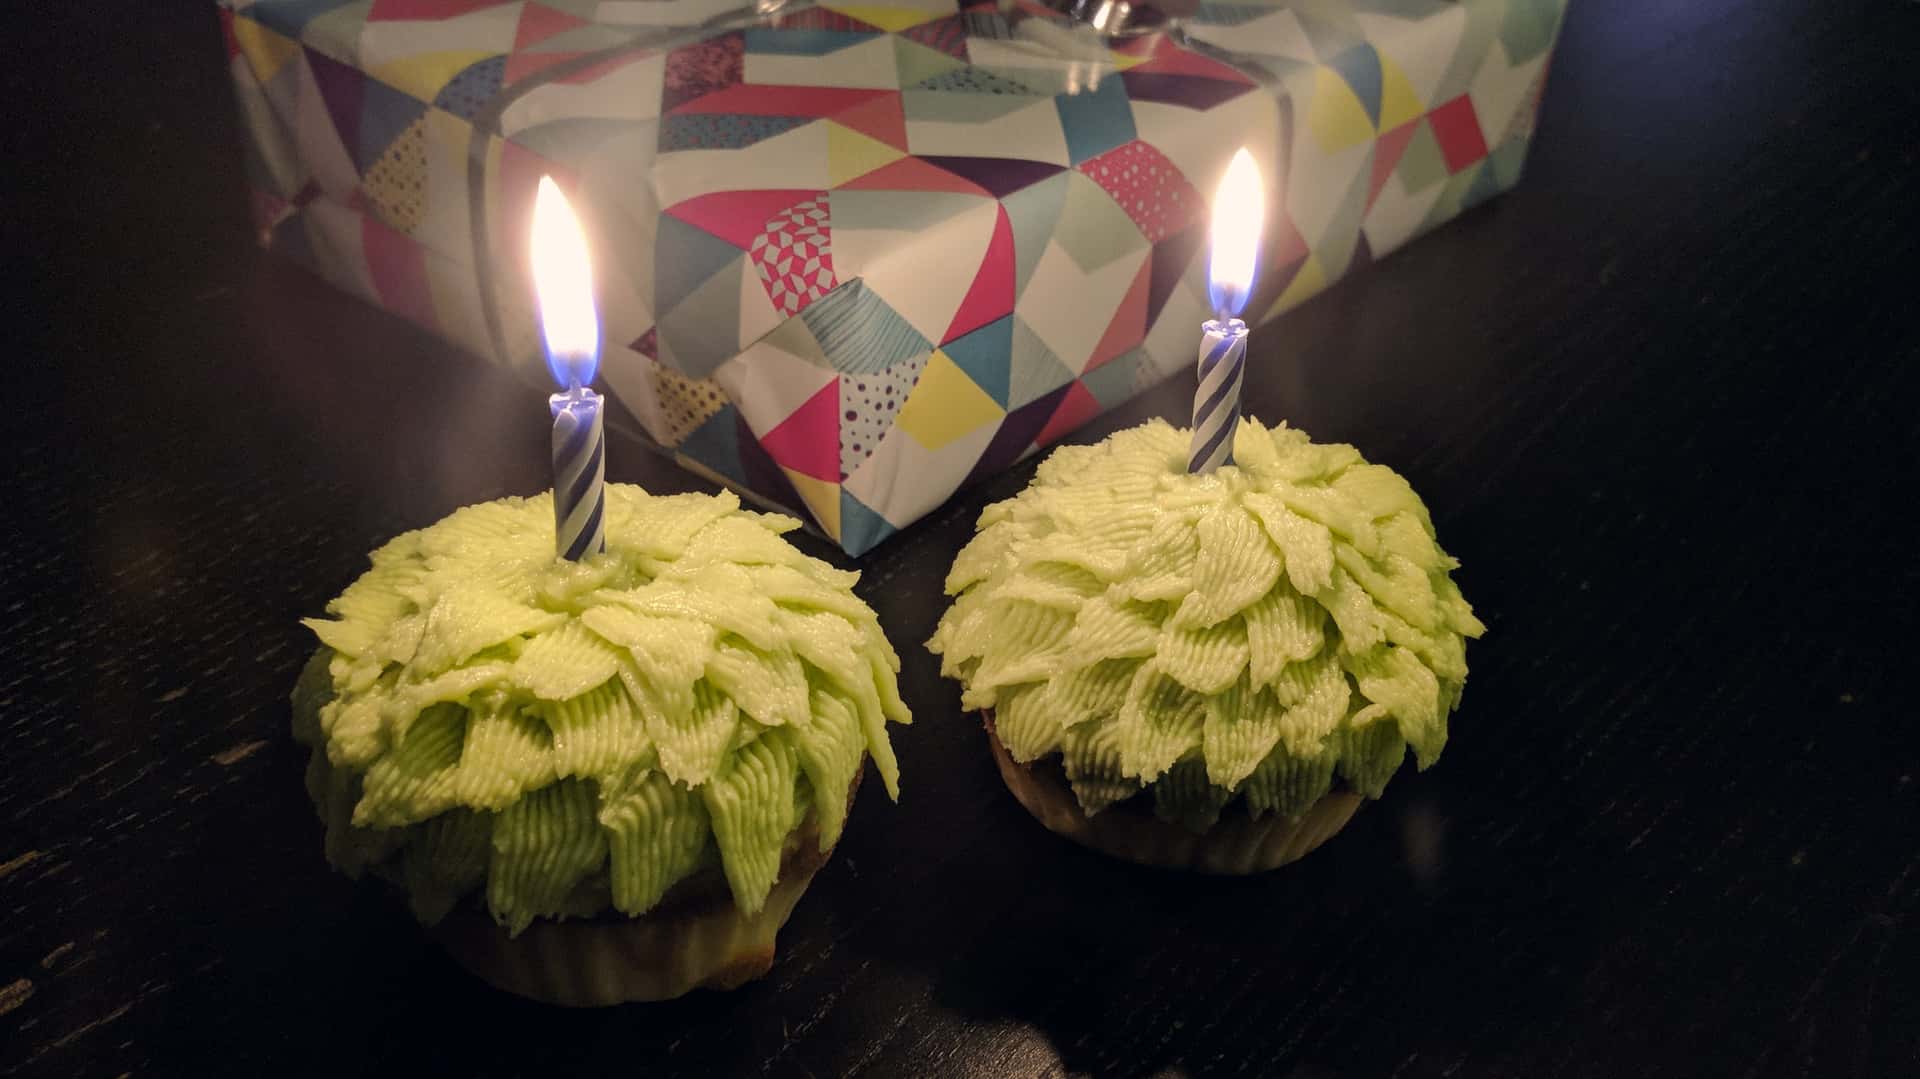 cupcakes decorated as hops with hop-flavored frosting